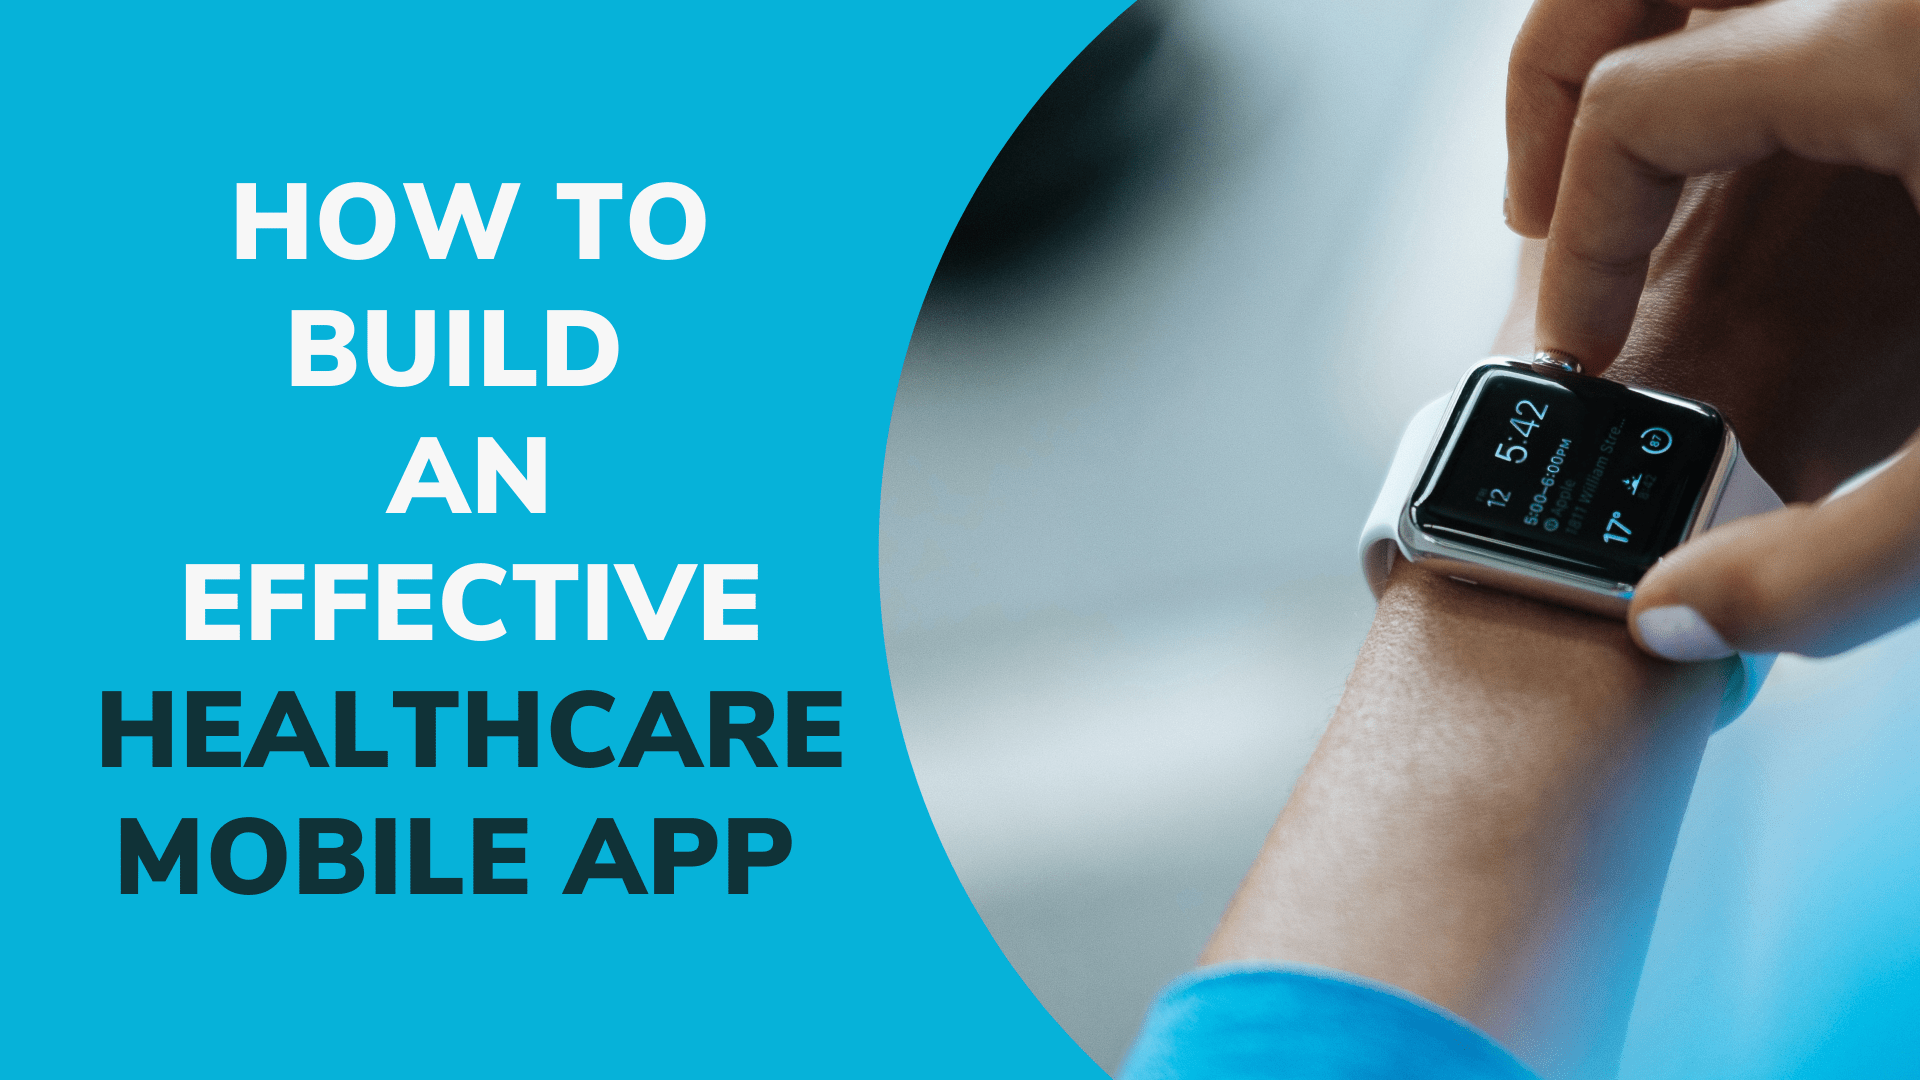 How to Build an Effective Healthcare Mobile App